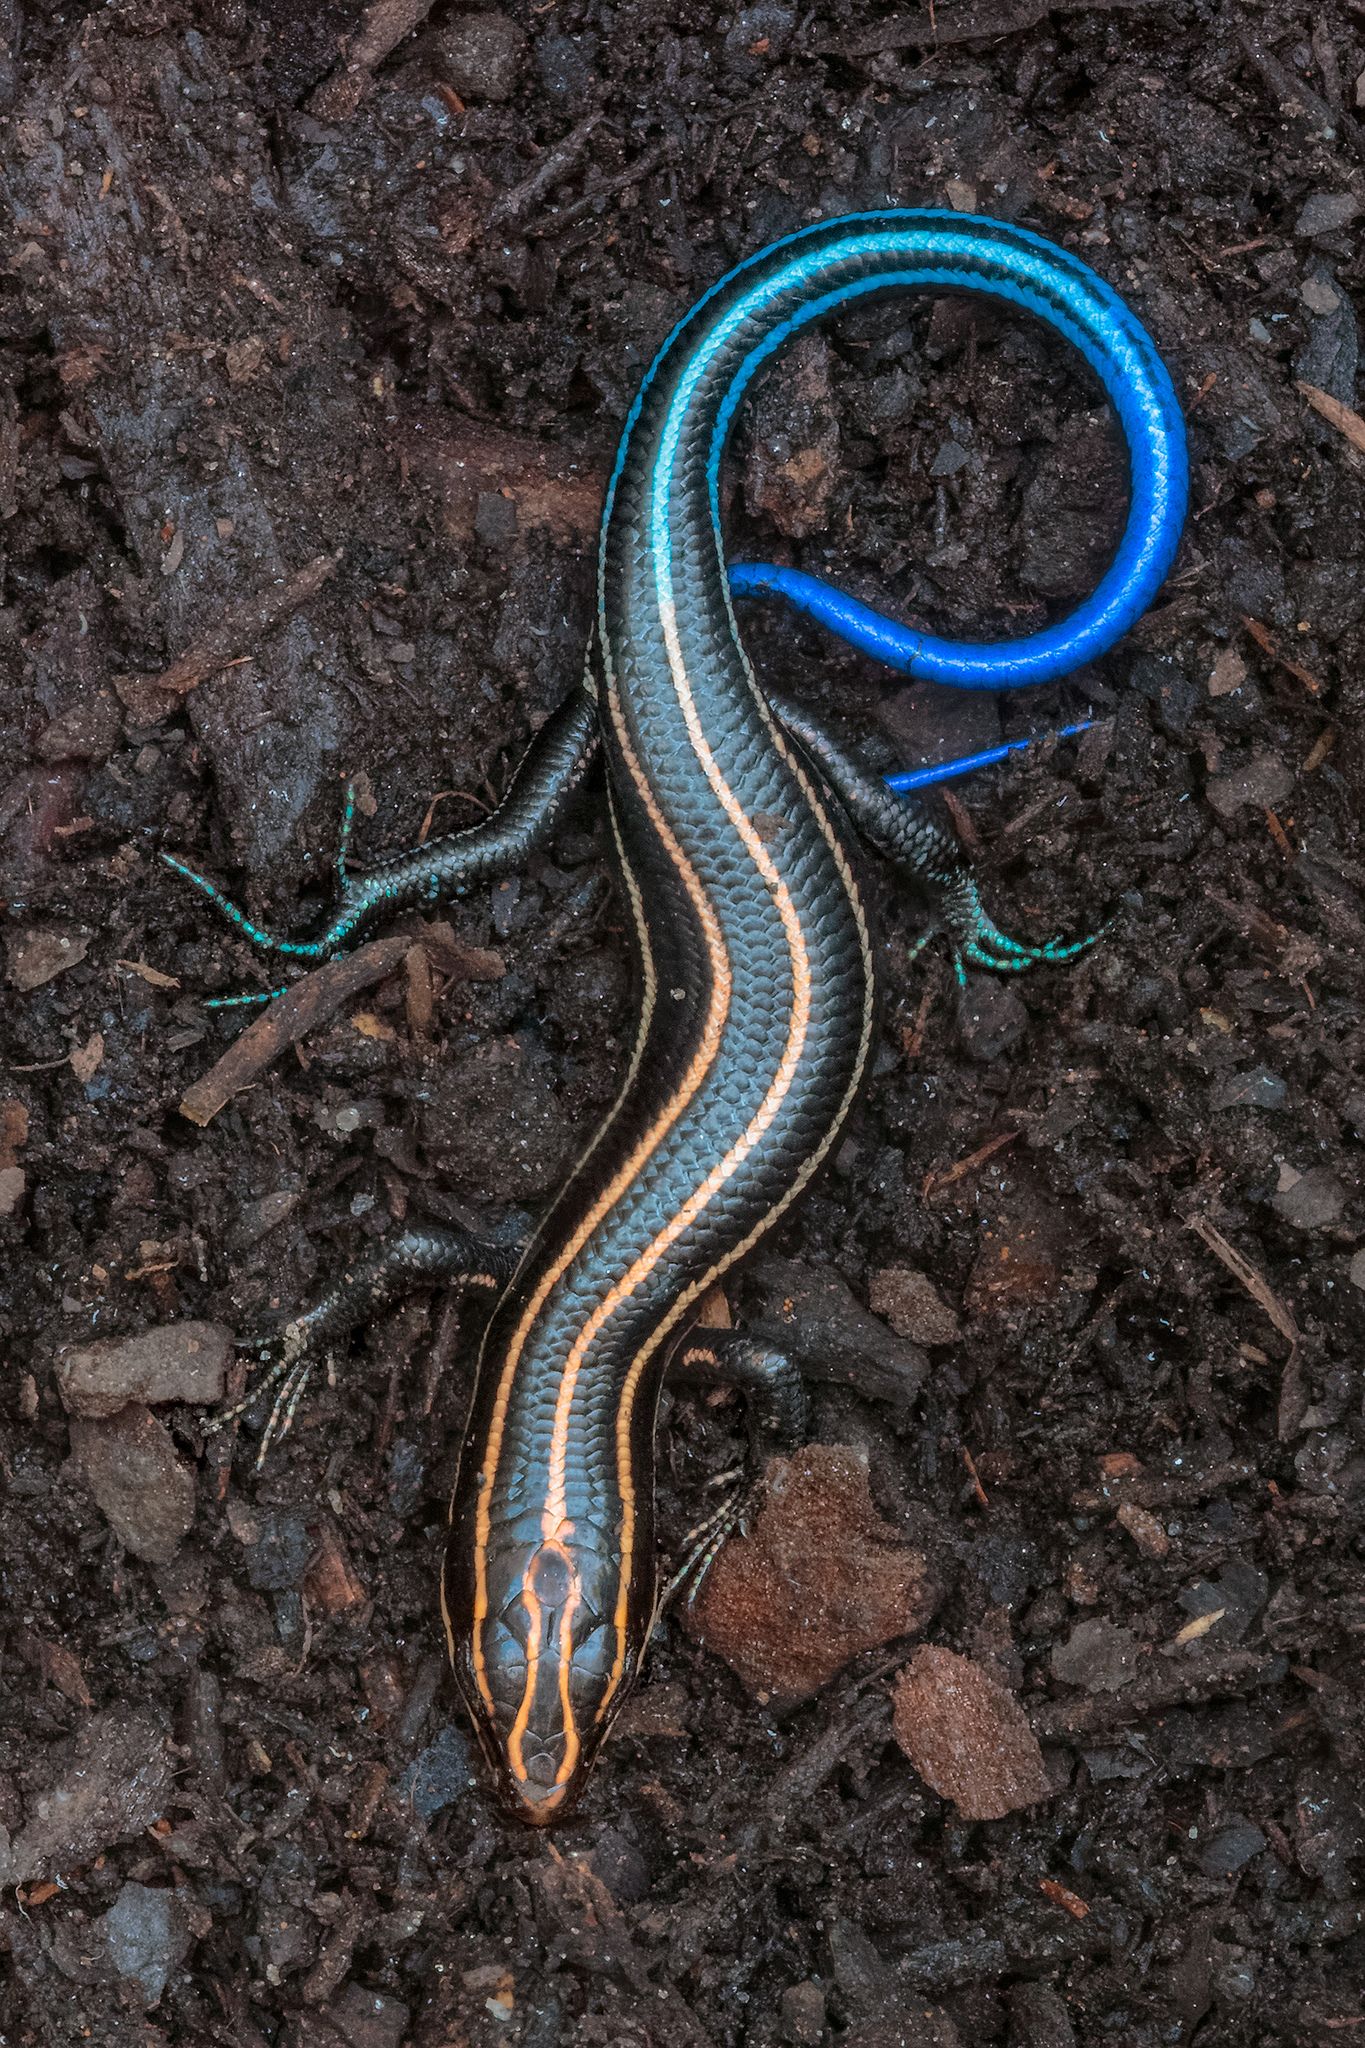 American Five-Lined Skink | Lizards, Reptiles and Animal